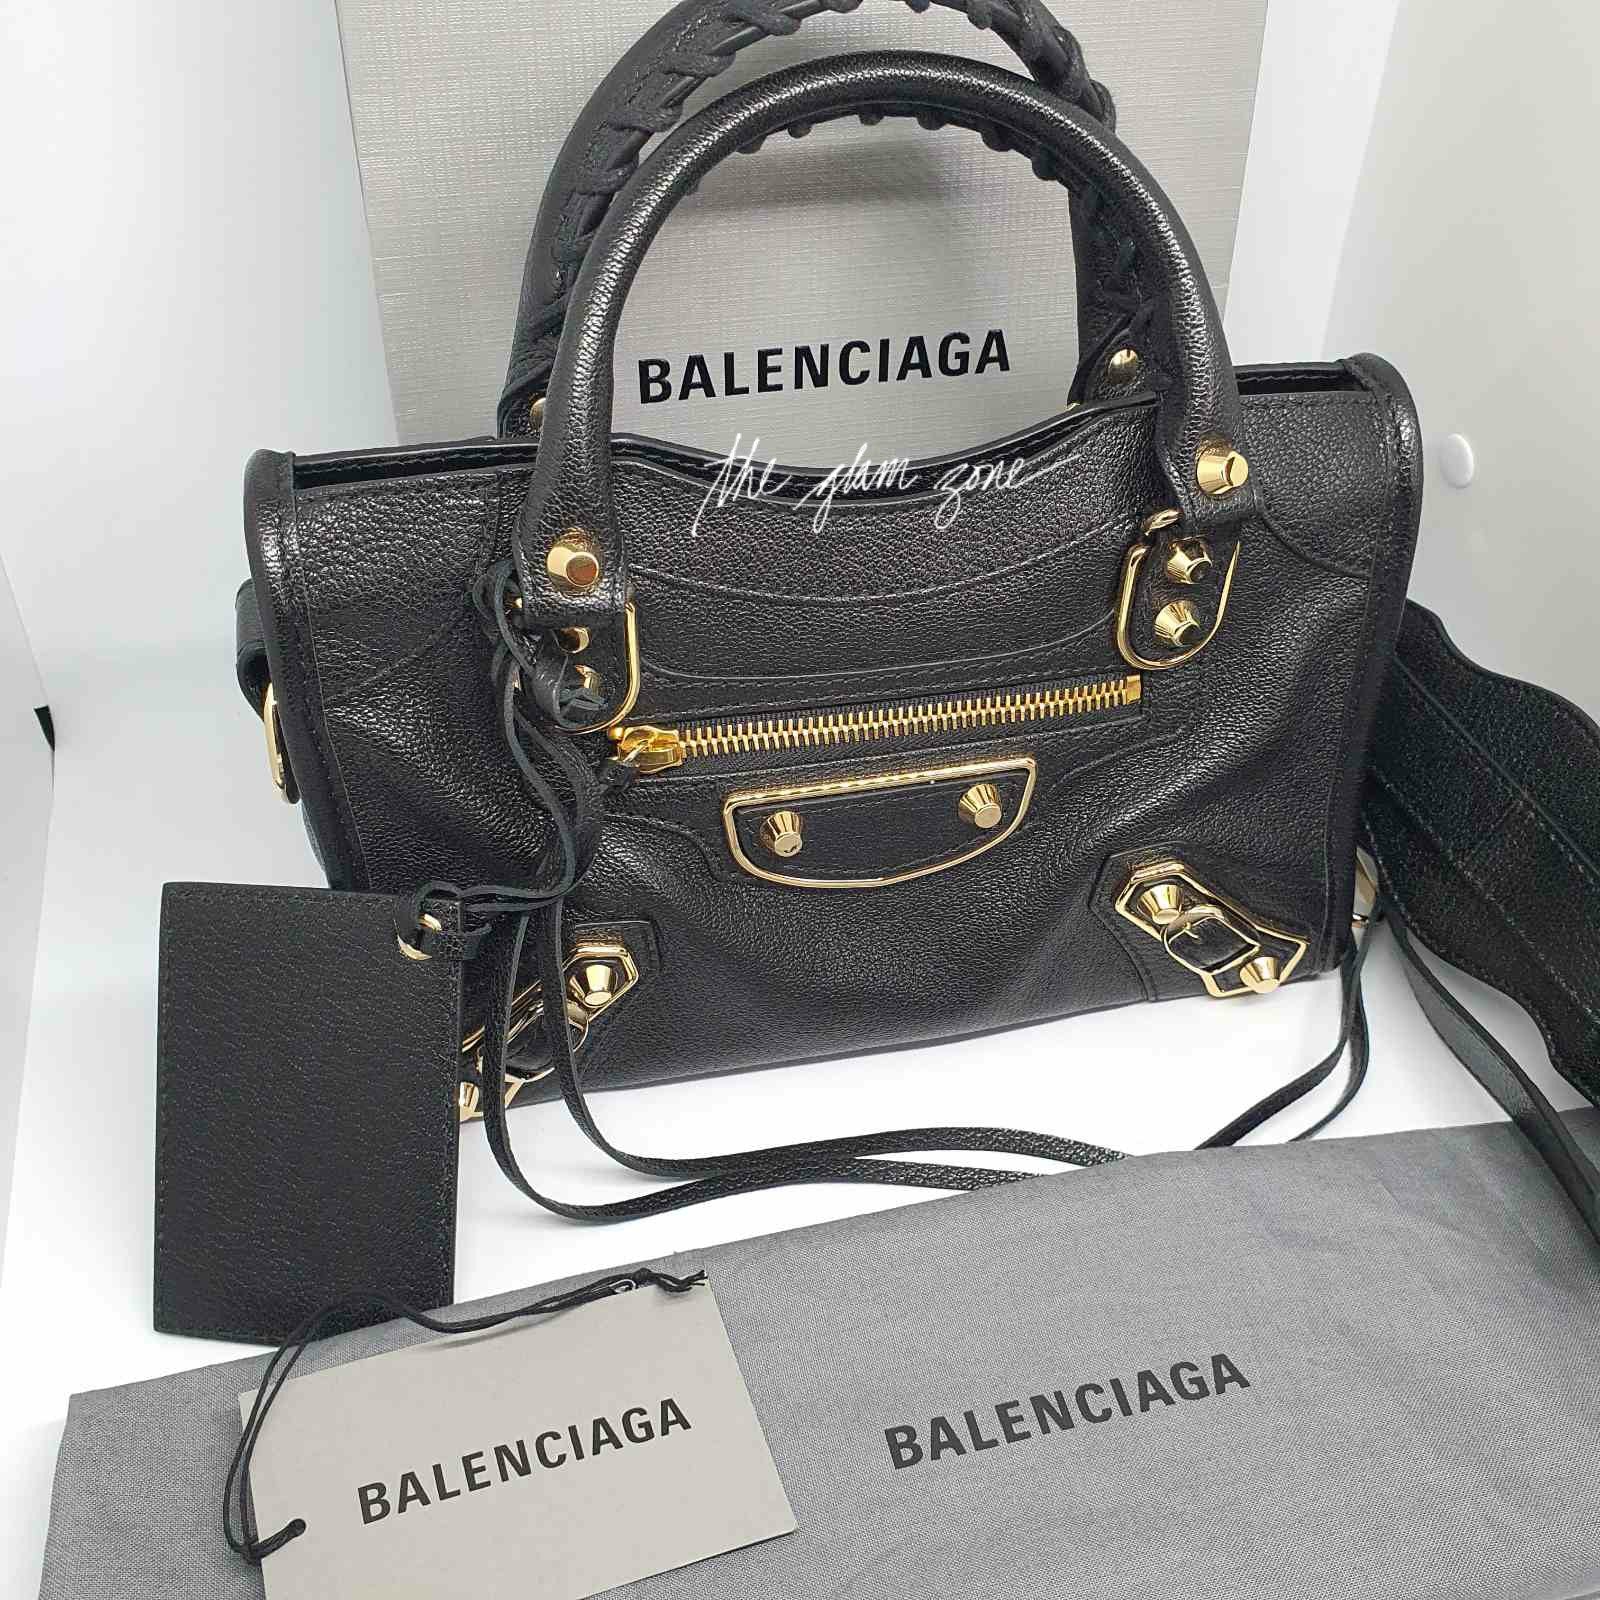 The Balenciaga Mini City Bag Colors and Styles for Spring  Summer 2014   Spotted Fashion